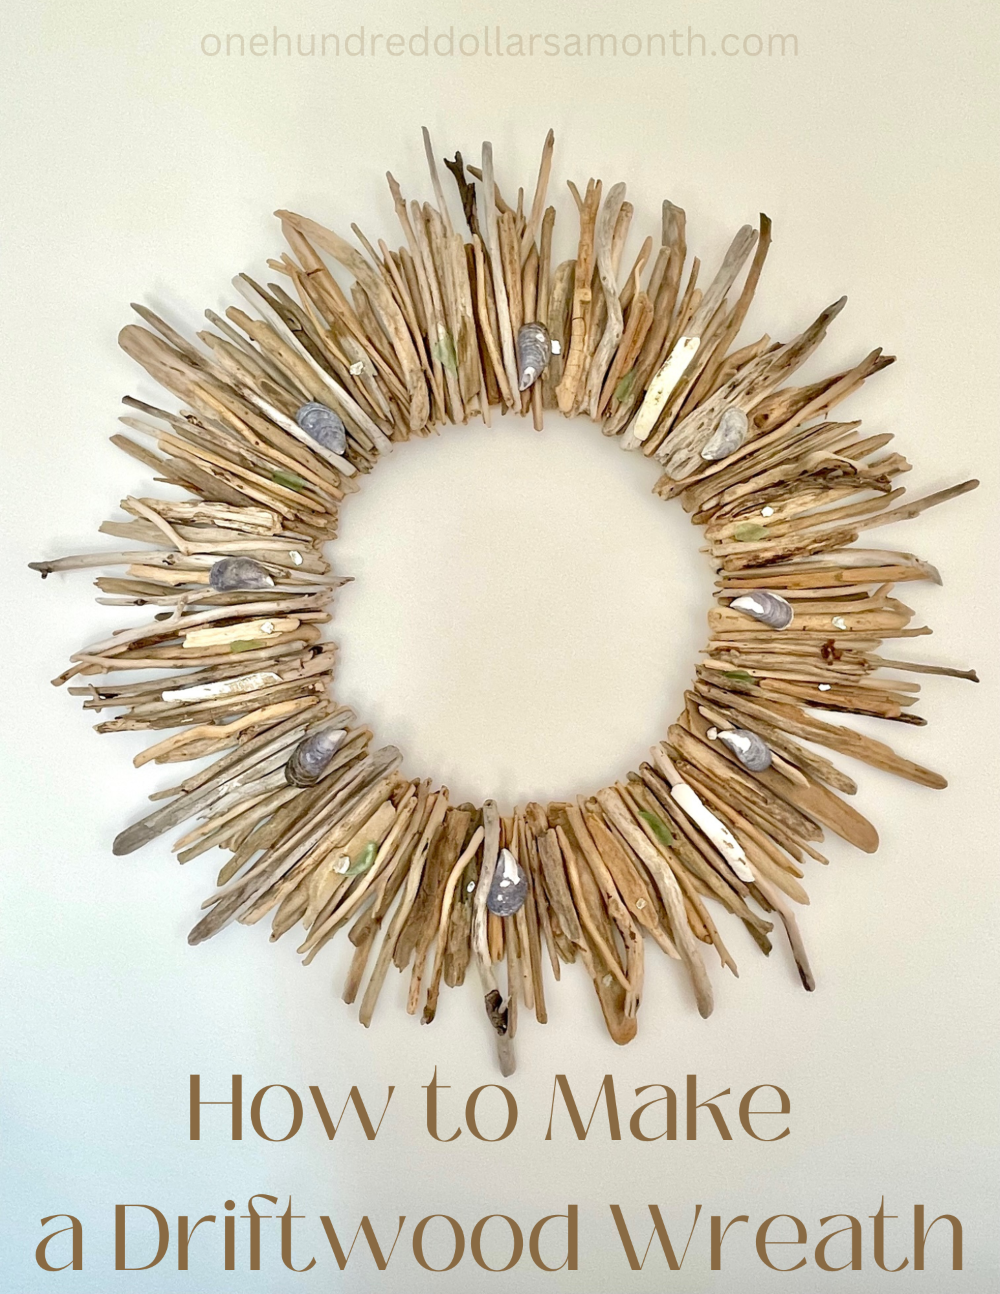 How to Make a Driftwood Wreath